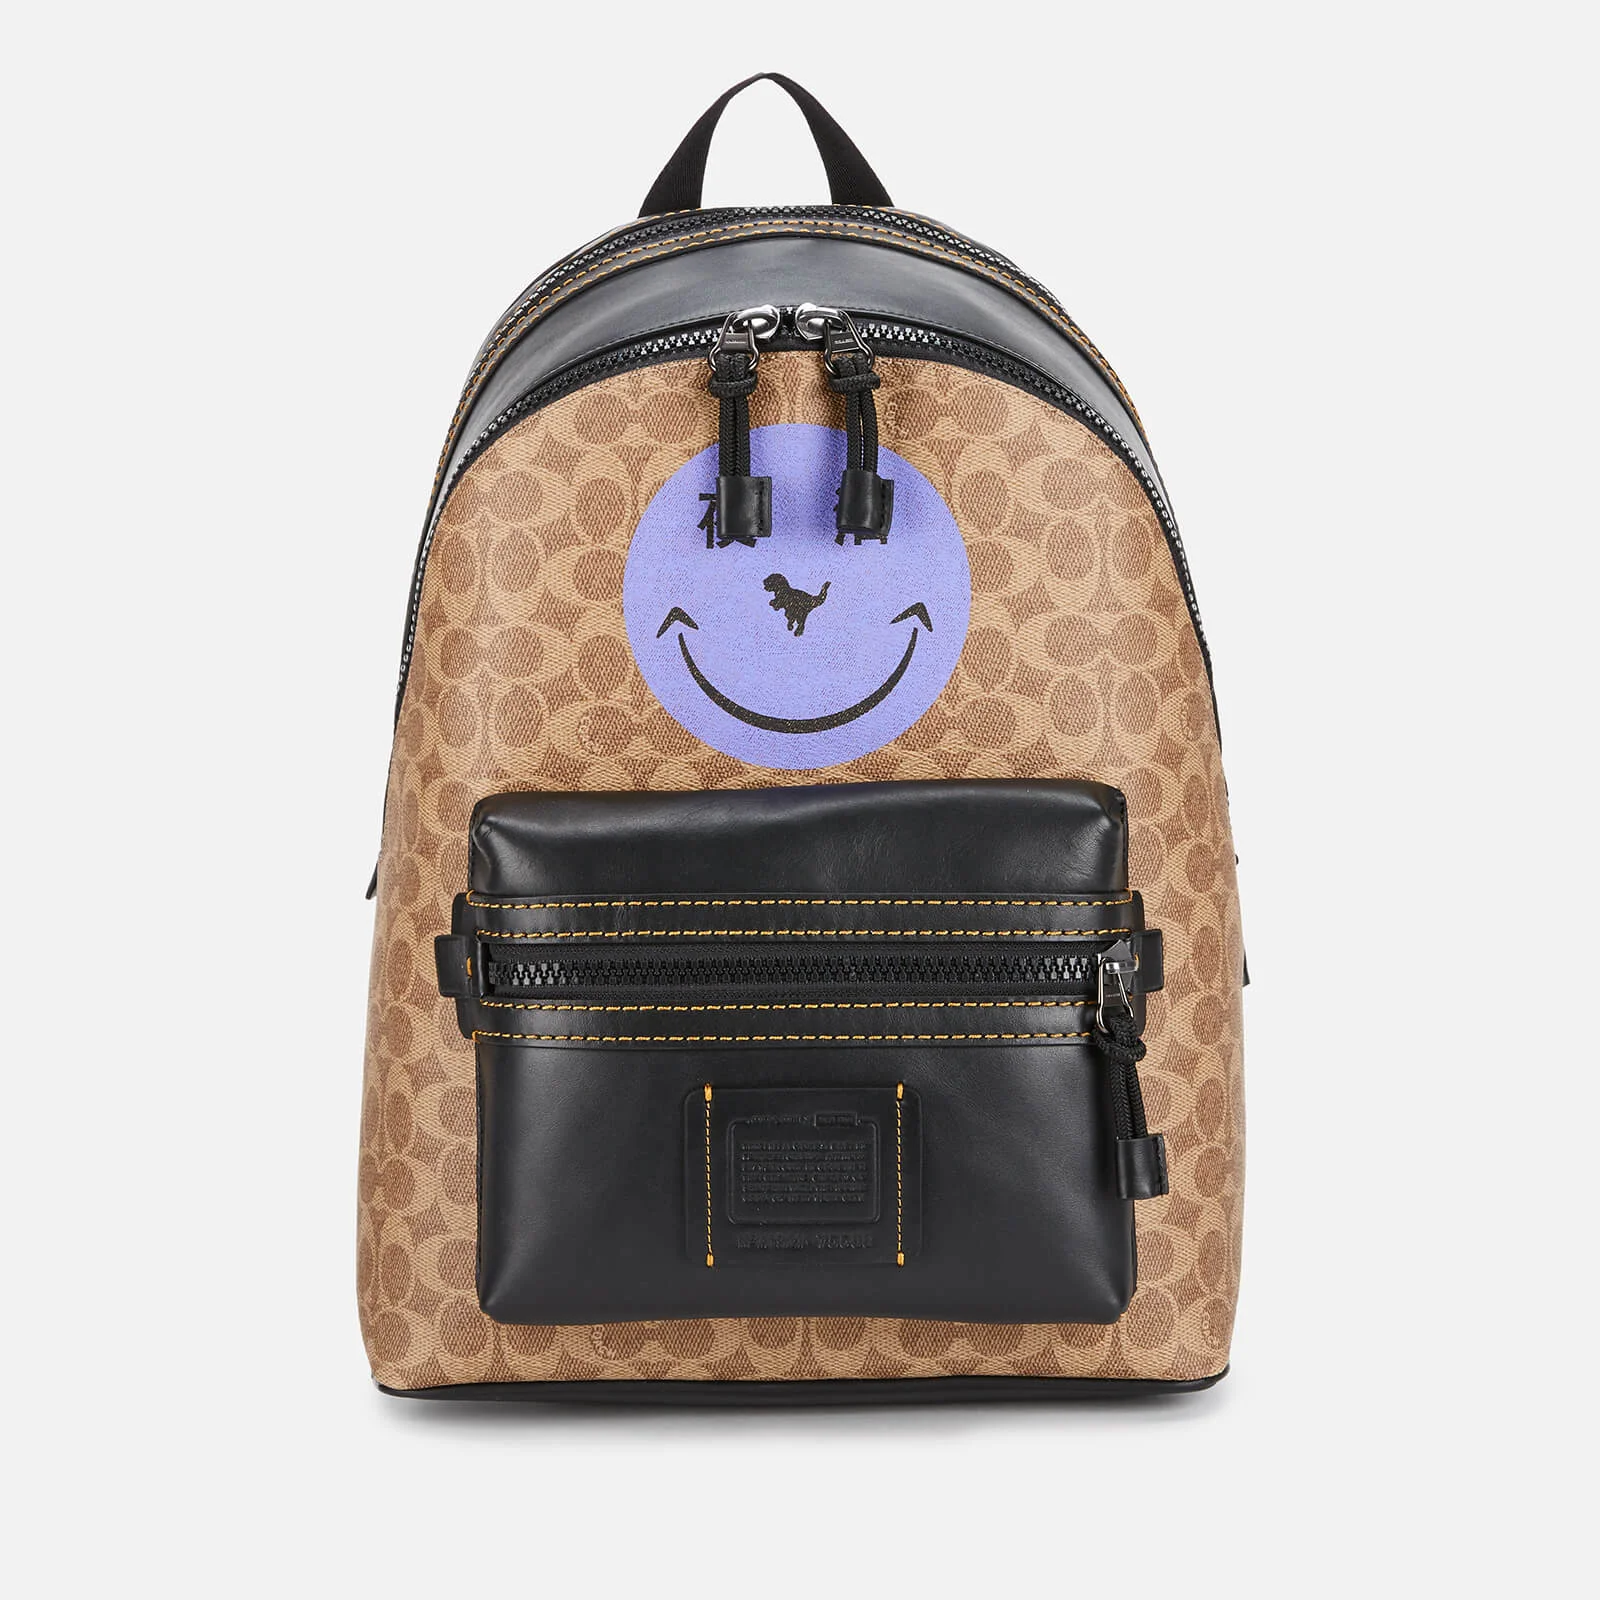 Coach Signature Smiley Academy Backpack with Rexy By Yeti Out - JI/Khaki Image 1